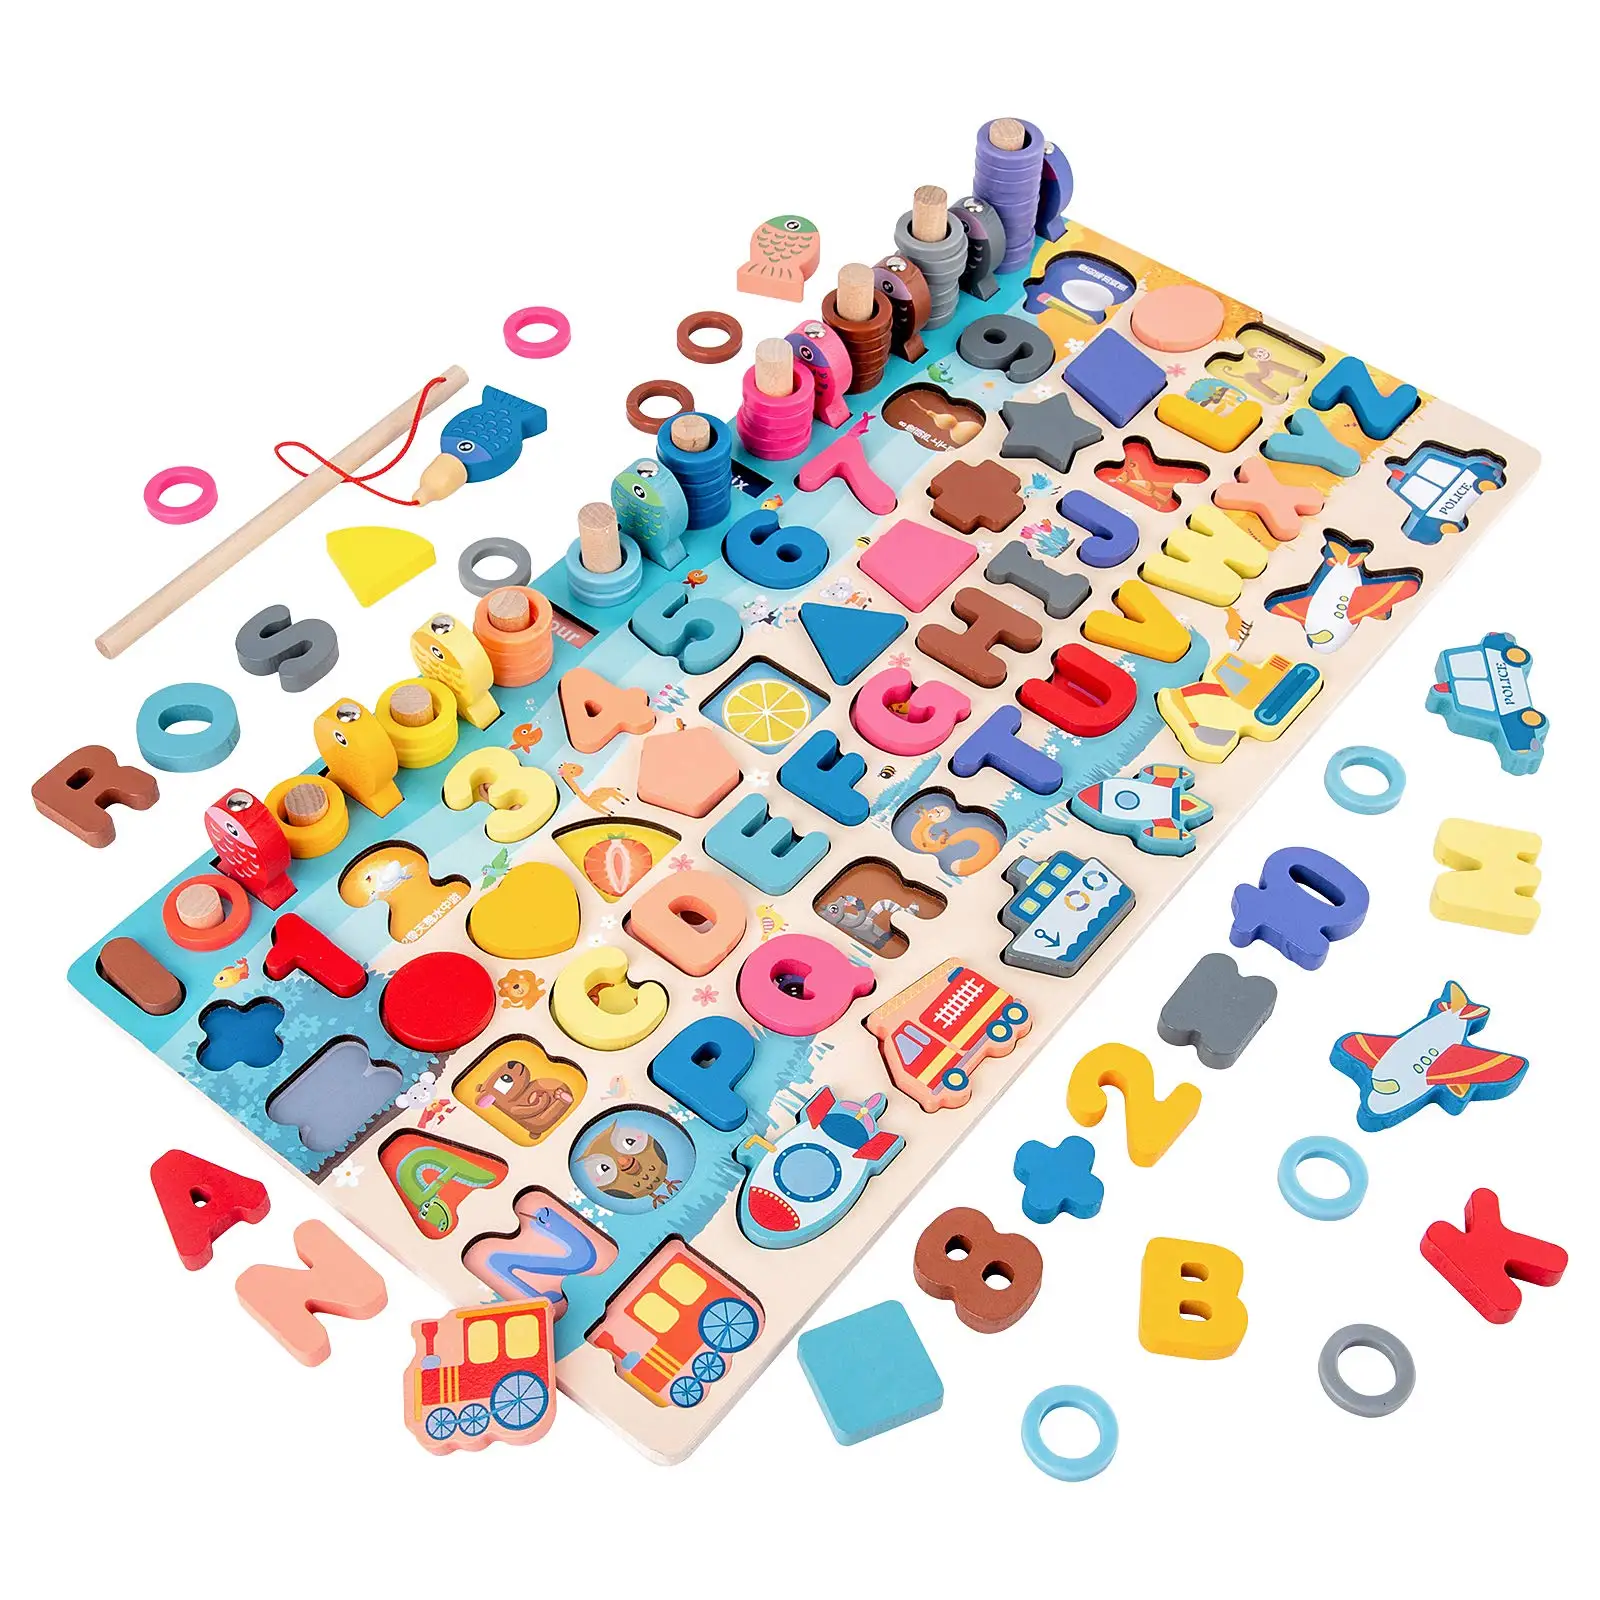 Montessori Wooden Toys Kids Busy Board Animal Math Fishing Numbers Matching Digital Shape Educational Toys For Children Gifts